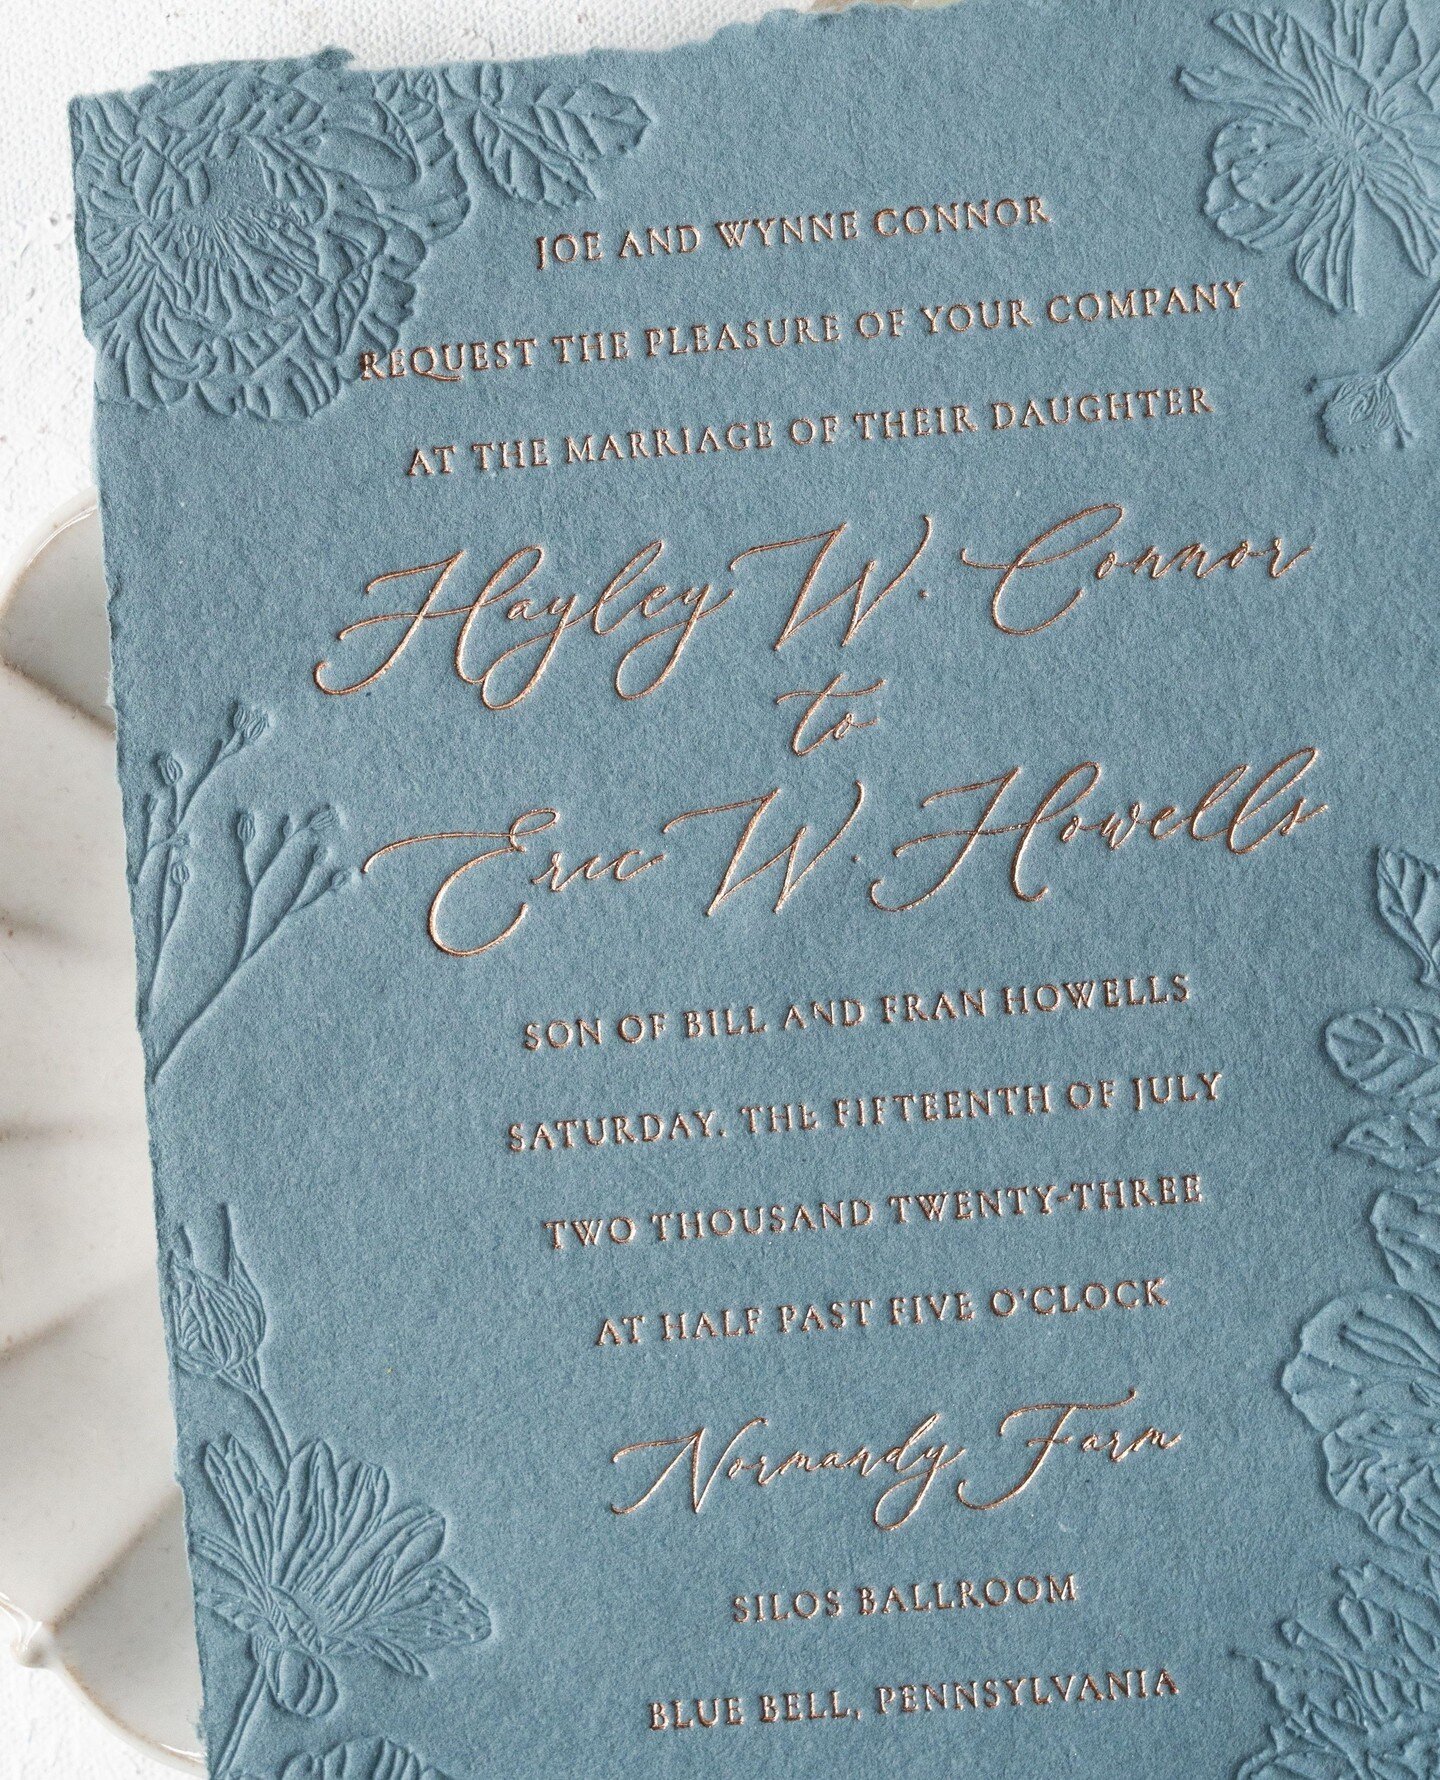 Texture matters.⁠
⁠
Handcrafted on slate blue paper with delicate rose gold foil and blind debossed florals, this invitation offers a tactile experience like no other.⁠
⁠
Photo: @peterson.design.photo